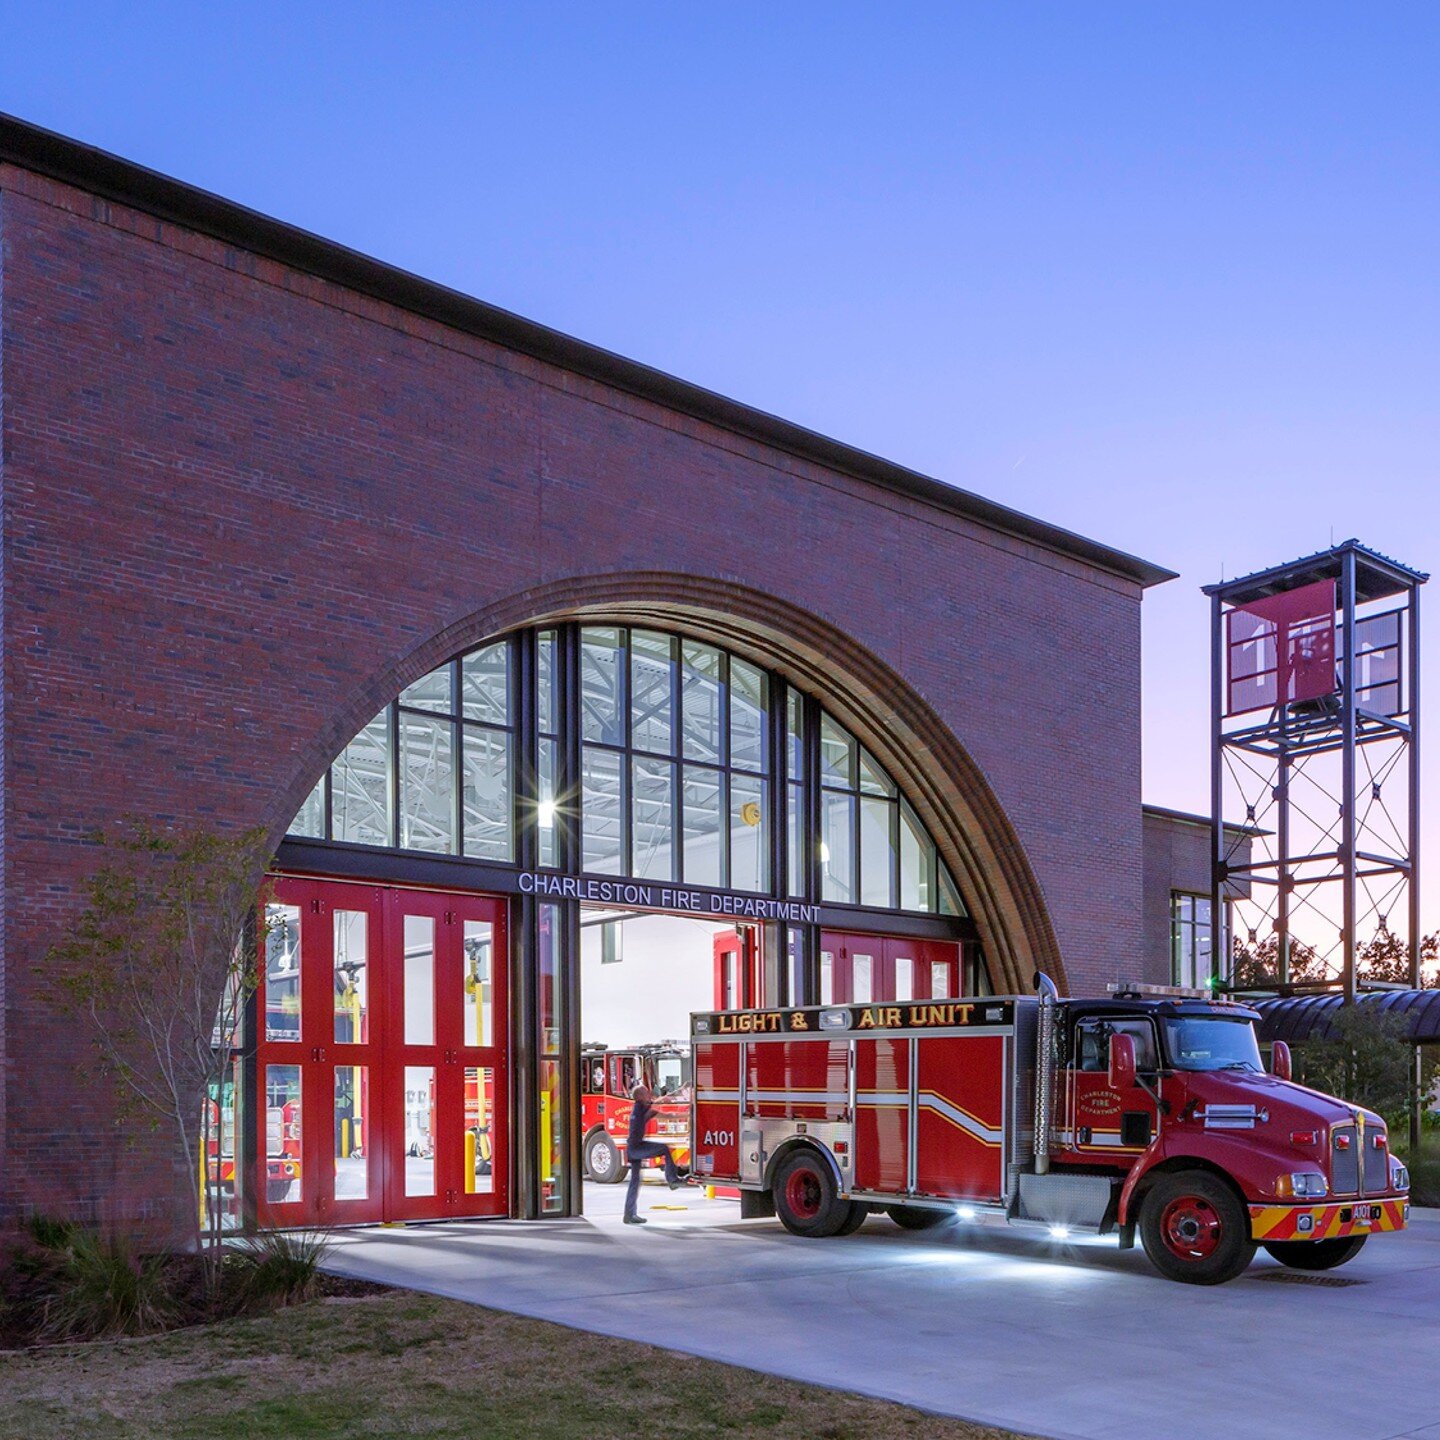 #TimecapsuleTuesday

A Citation Award in the Commercial Large category goes to Liollio Architecture for Charleston Fire Station 11

Fire Station 11 resides next to the site where 9 firefighters perished in 2007 while fighting a fire in a furniture st